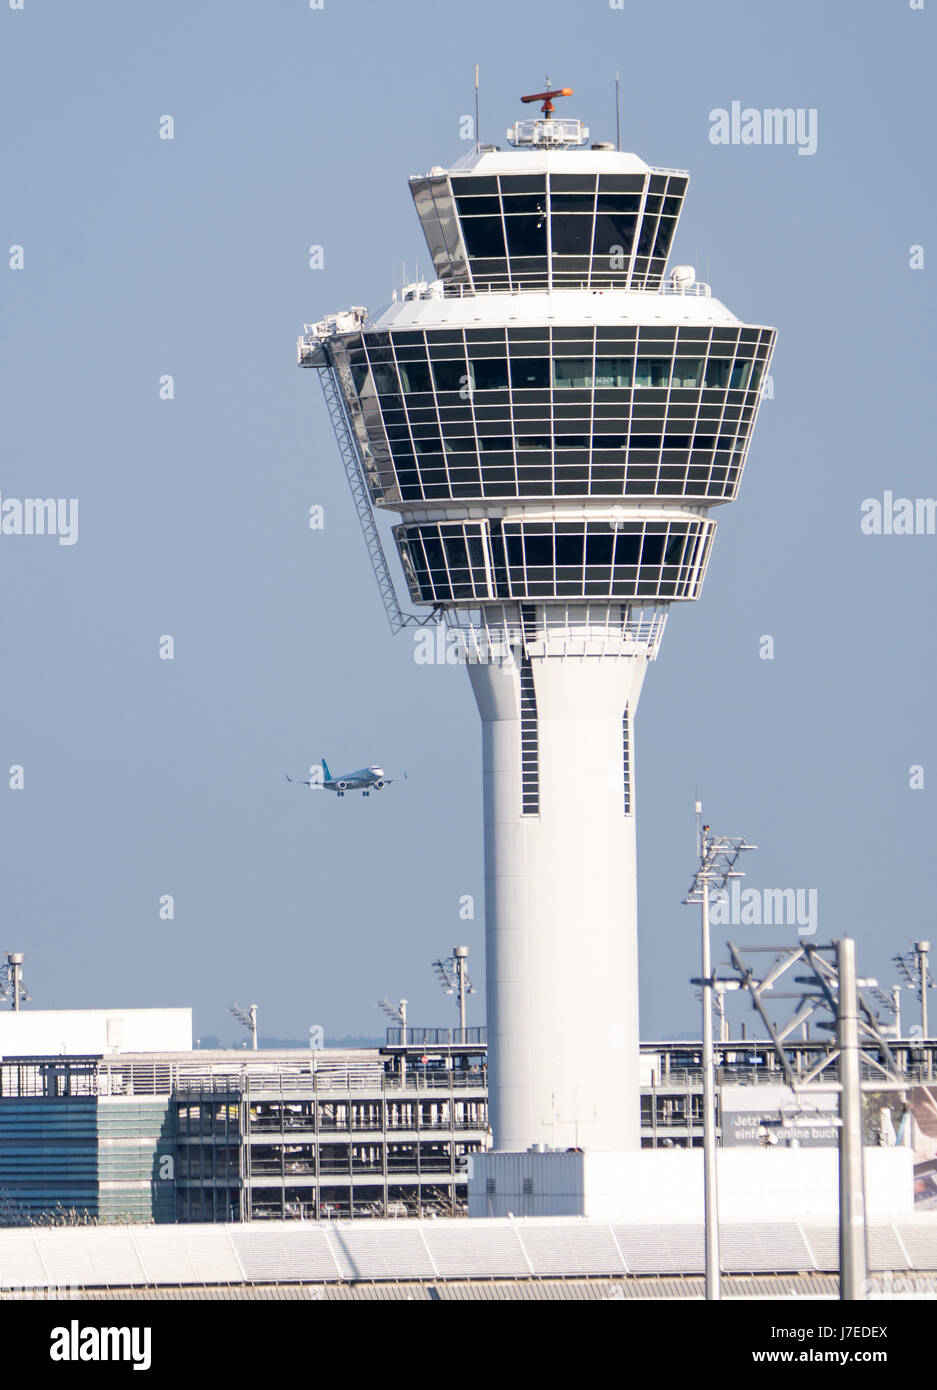 MUNICH, GERMANY - APRIL 9: Control tower of the the airport of Munich, Germany on April 9, 2017. The ariport has over 40 million passengers a year. Fo Stock Photo